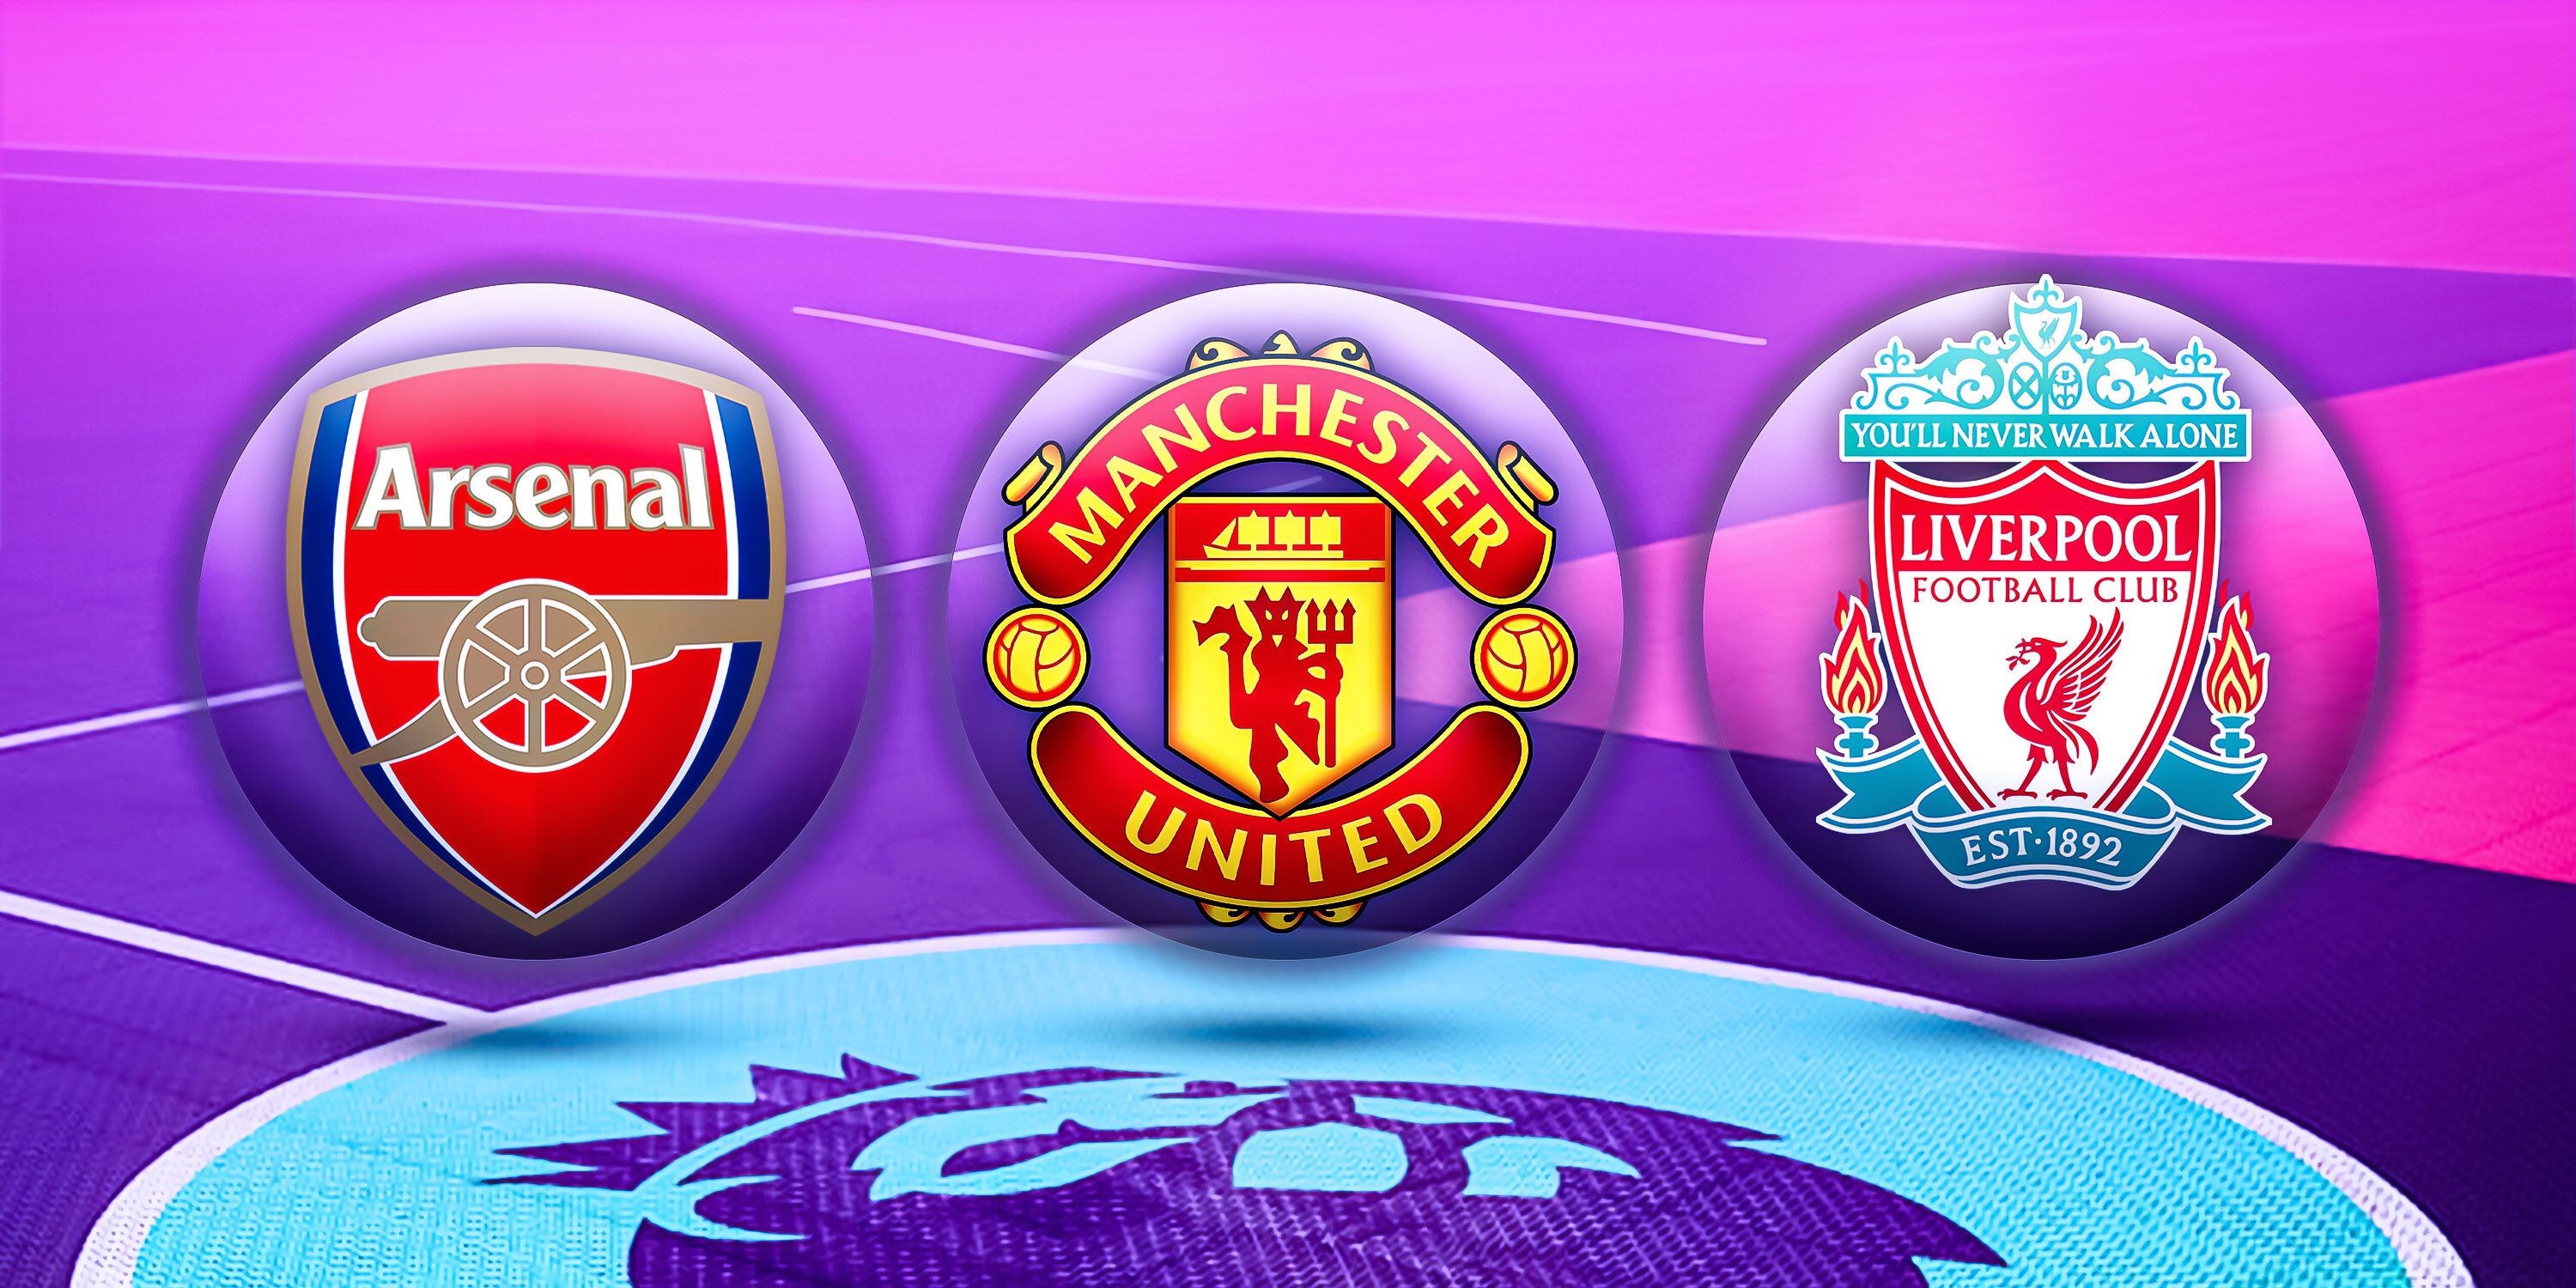 Custom image of the Premier League badges for Arsenal, Manchester United and Liverpool